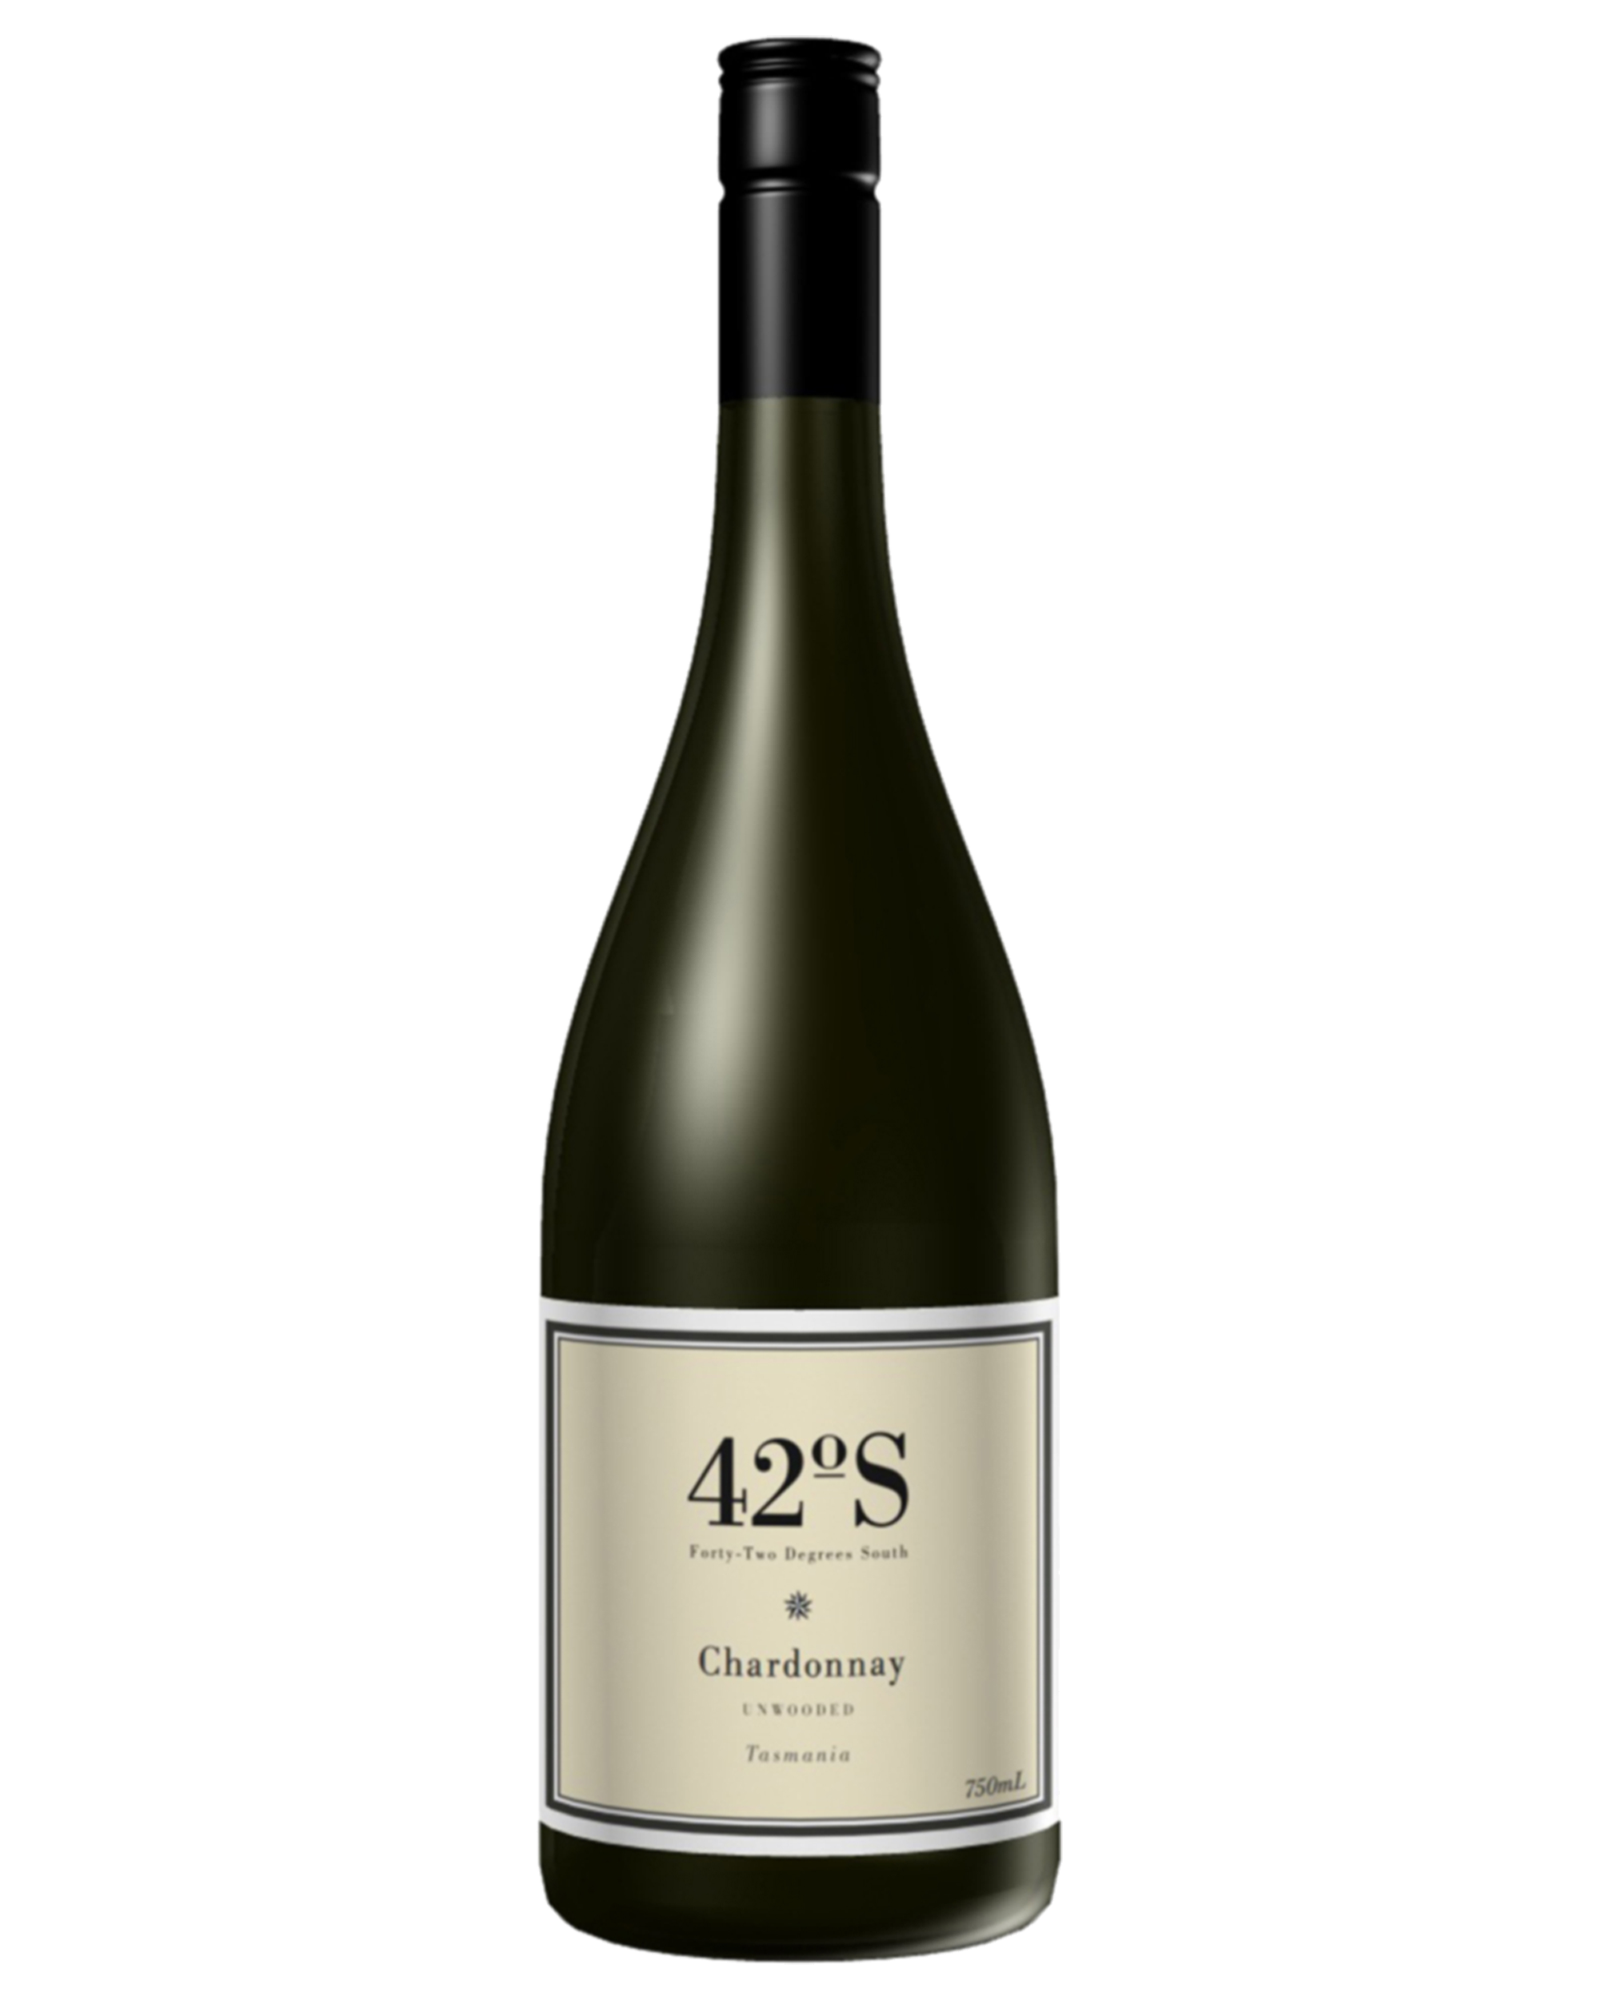 Frogmore Creek 42 degrees South Chardonnay